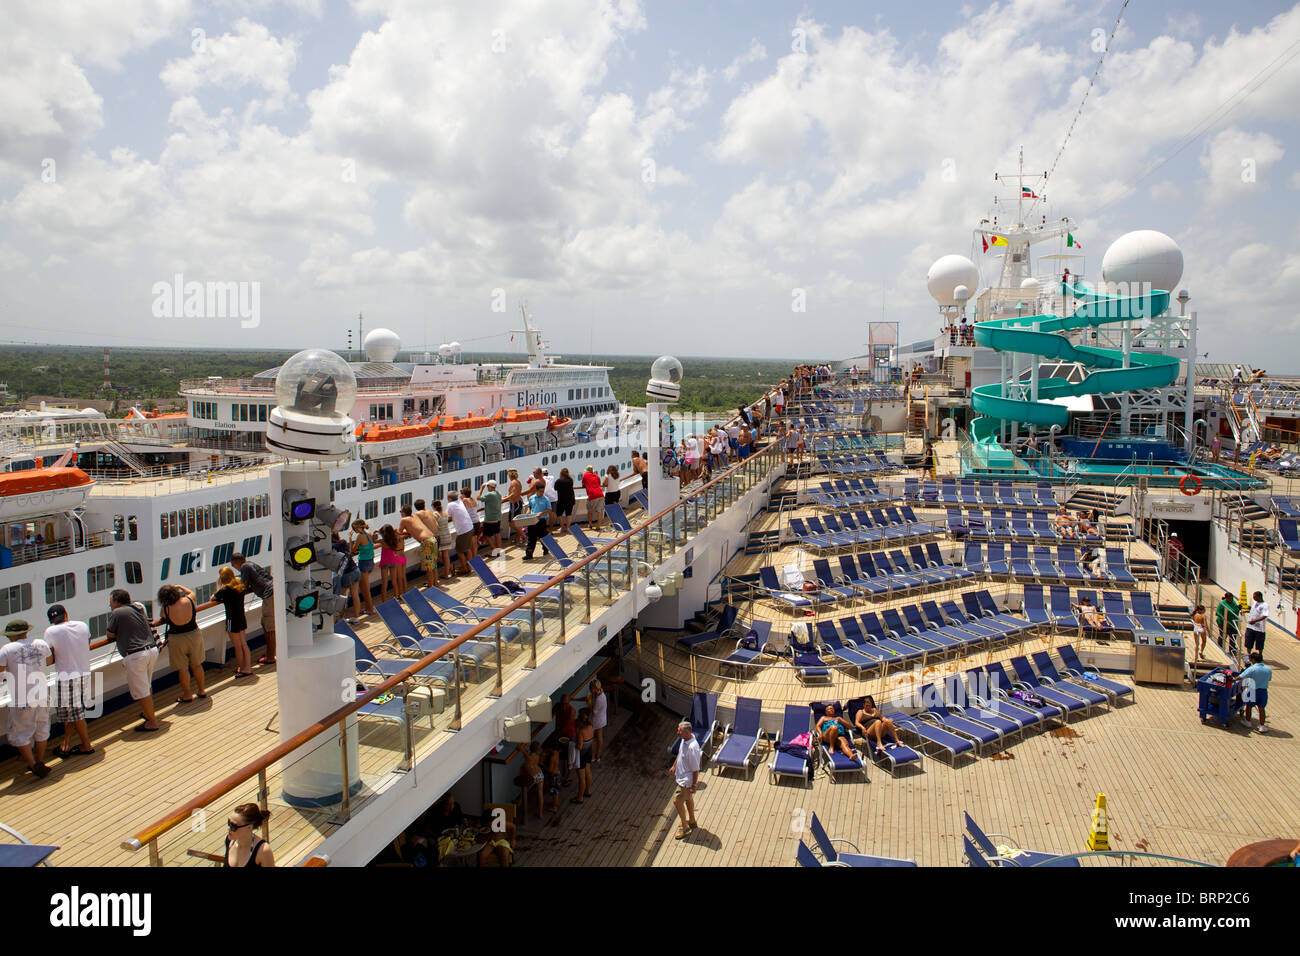 The top deck of the Carnival Destiny cruise ship, seen while docked in Cozumel, Mexico, adjacent to another cruise ship Stock Photo